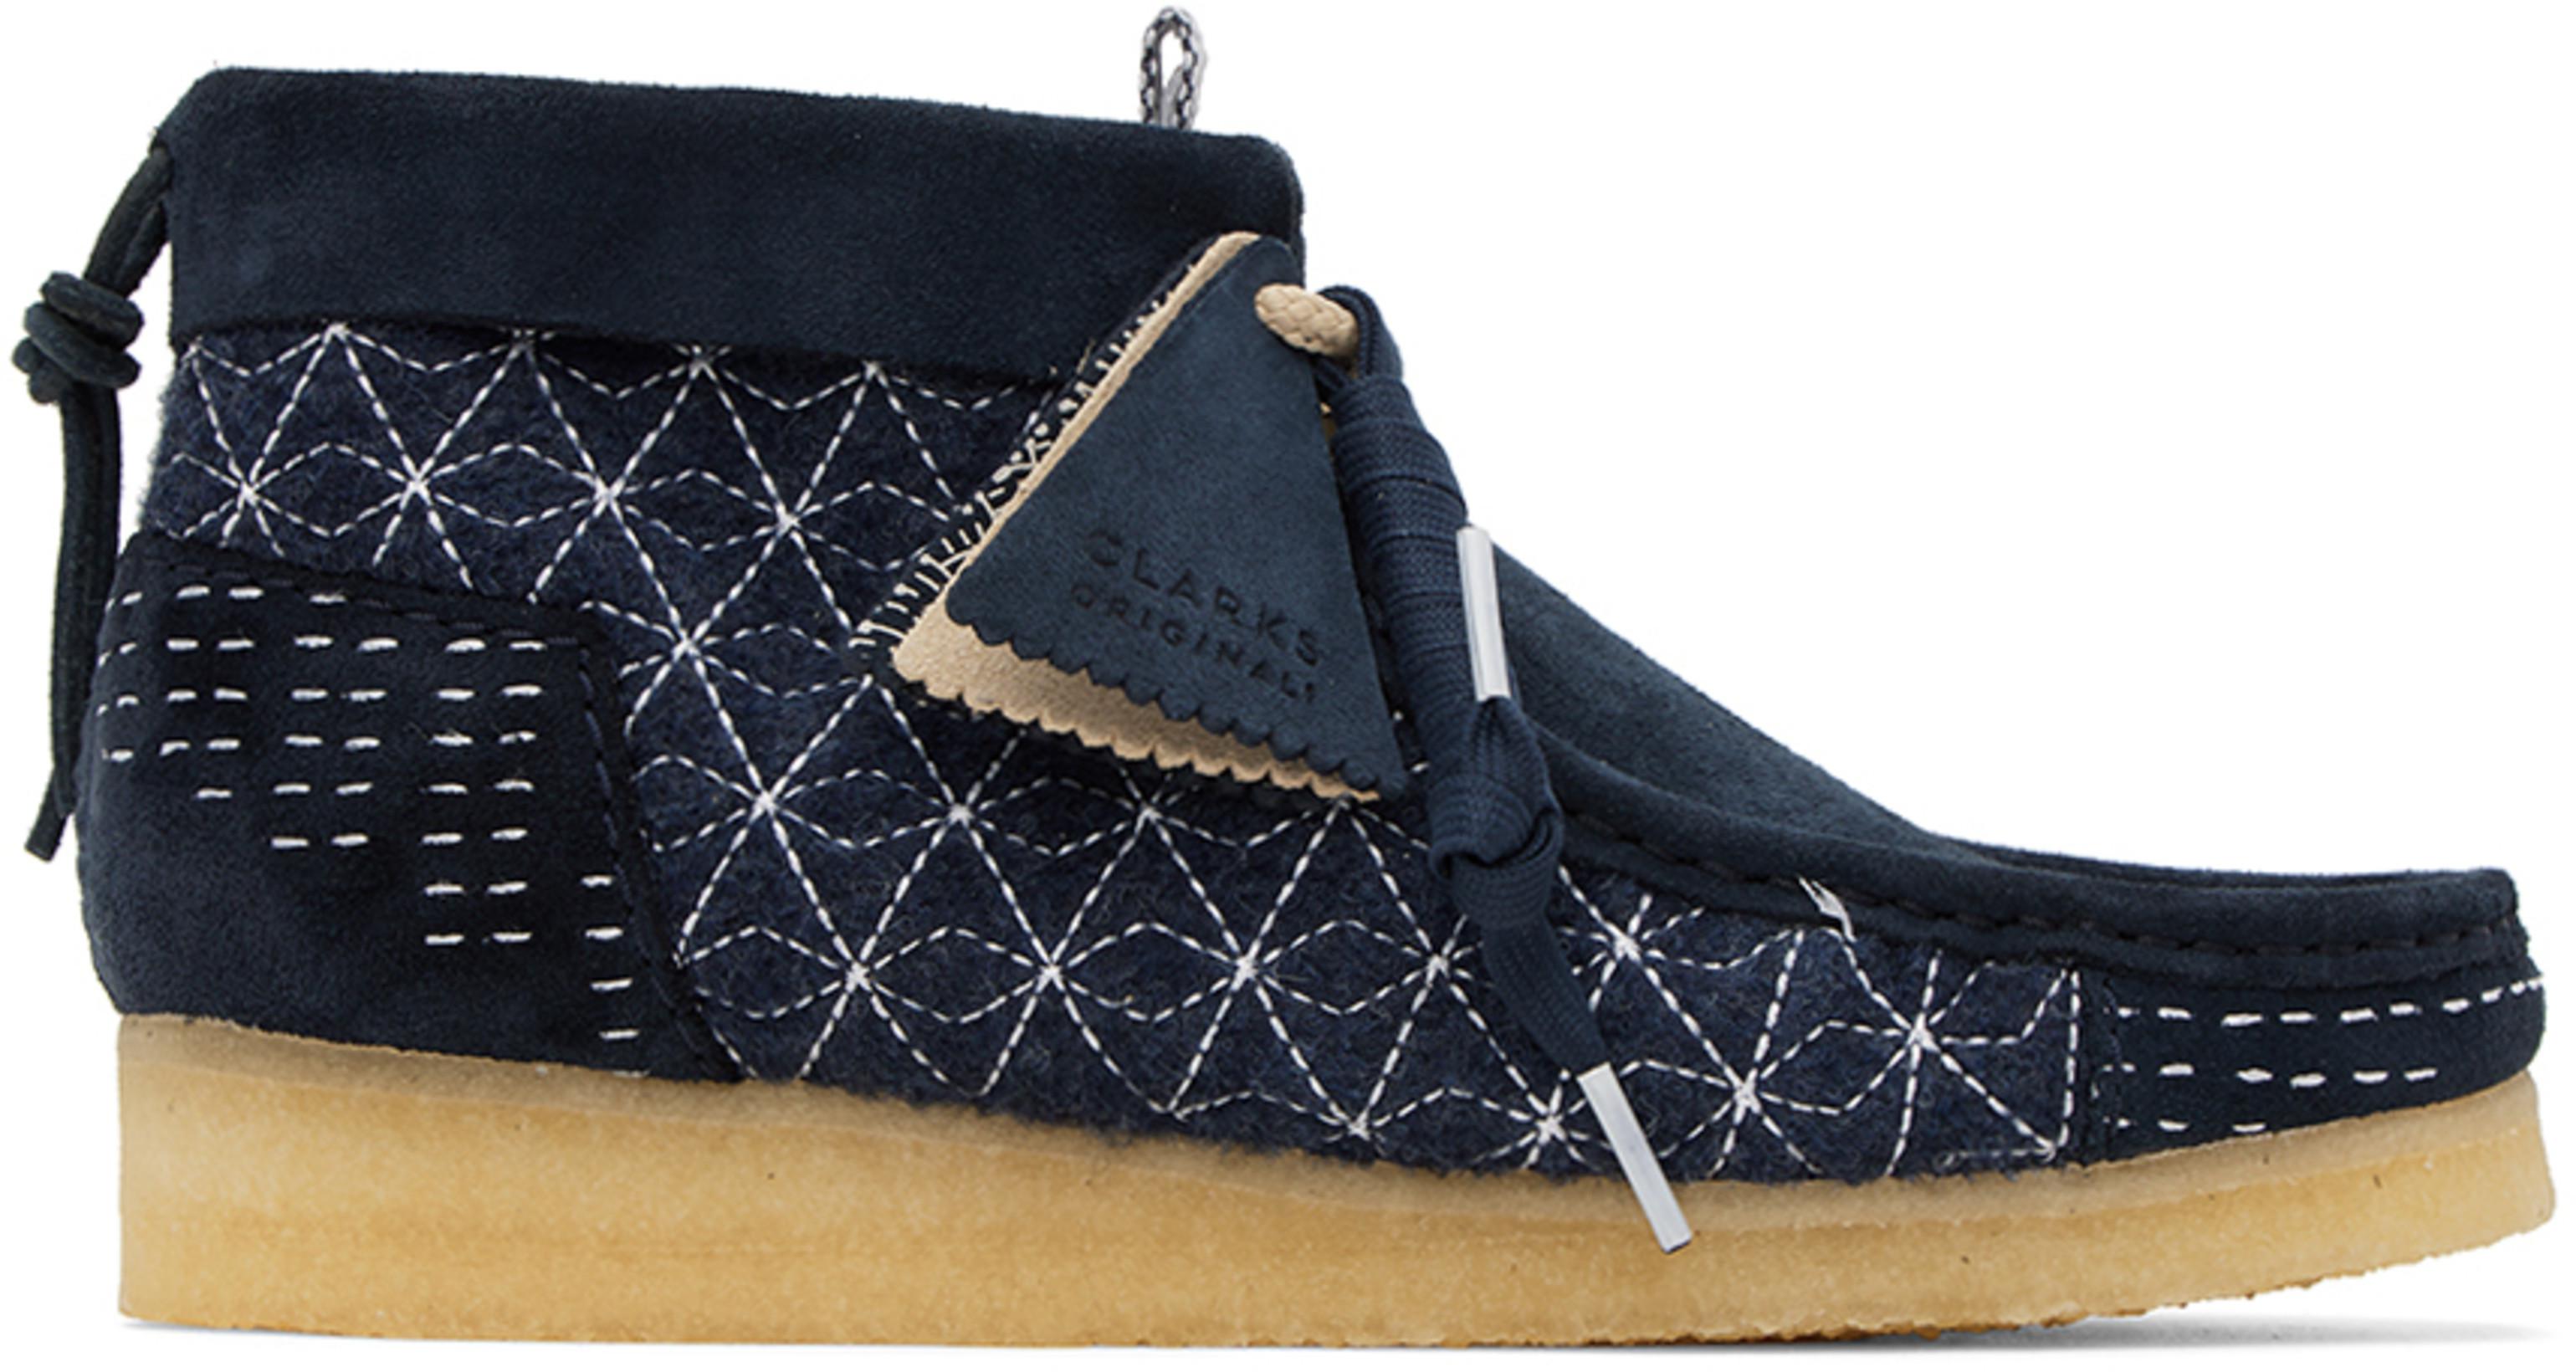 Navy Wallabee Boots by CLARKS ORIGINALS